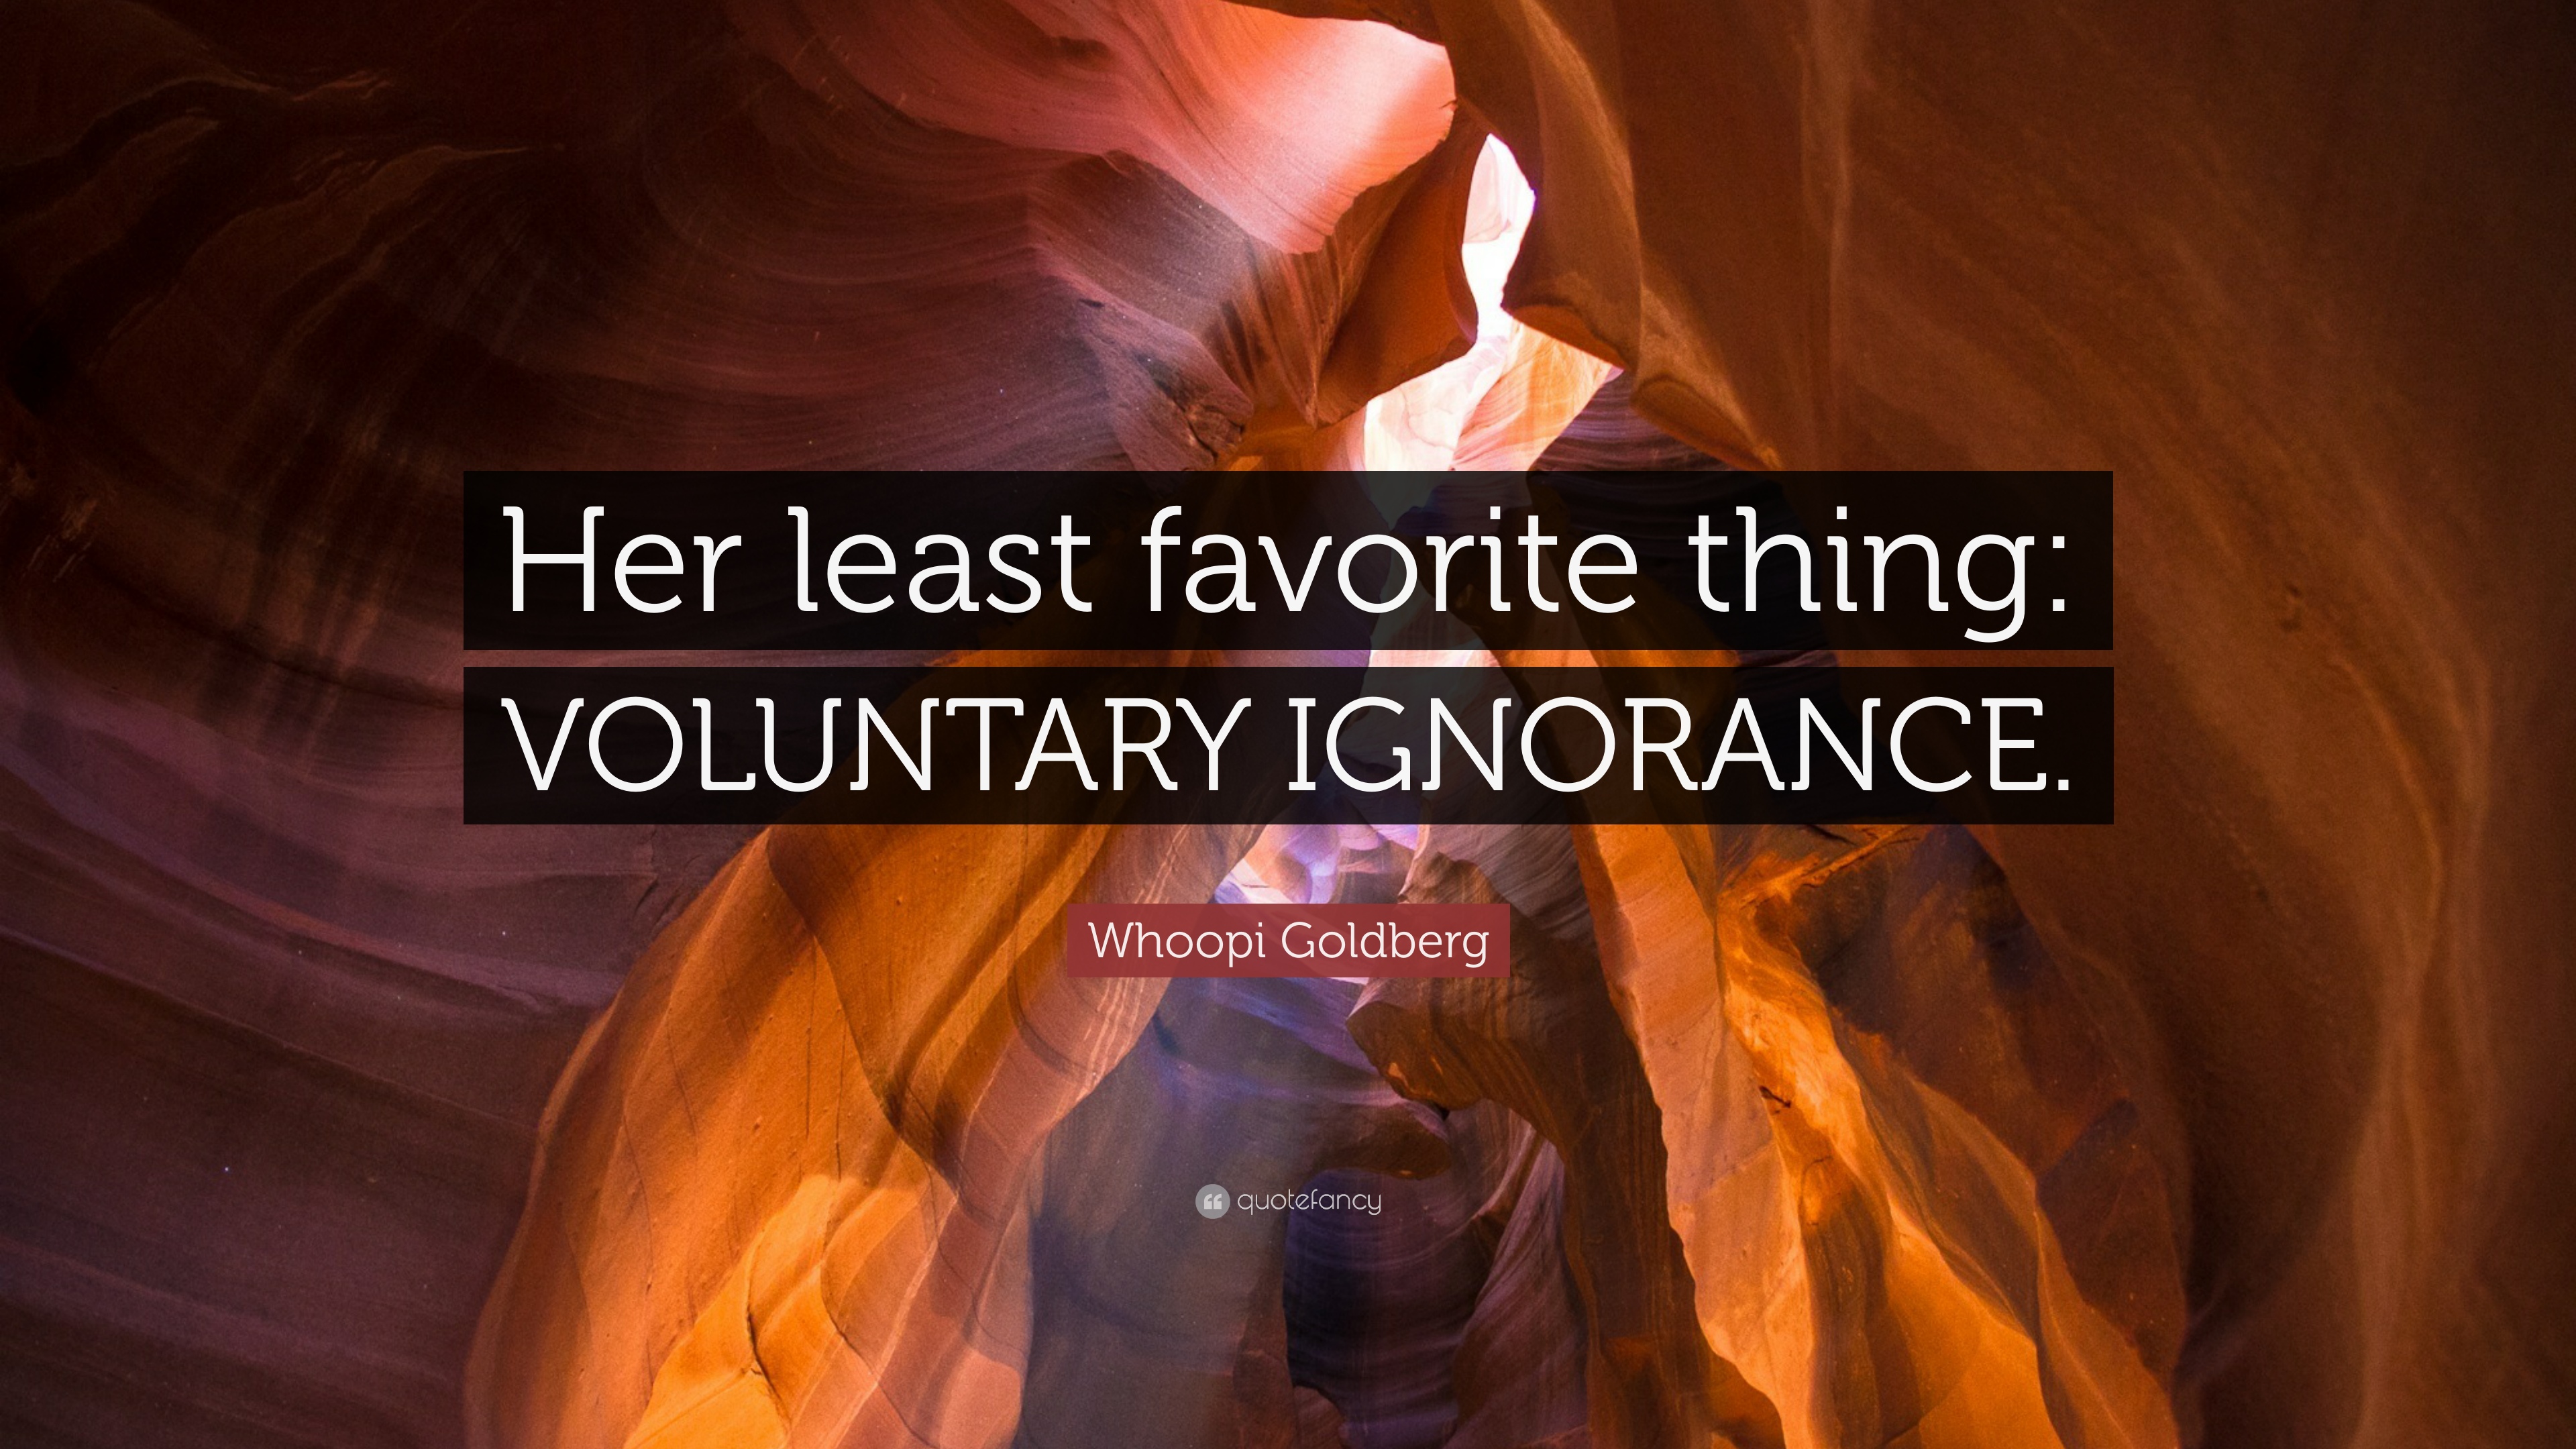 Whoopi Goldberg Quote: “Her least favorite thing: VOLUNTARY